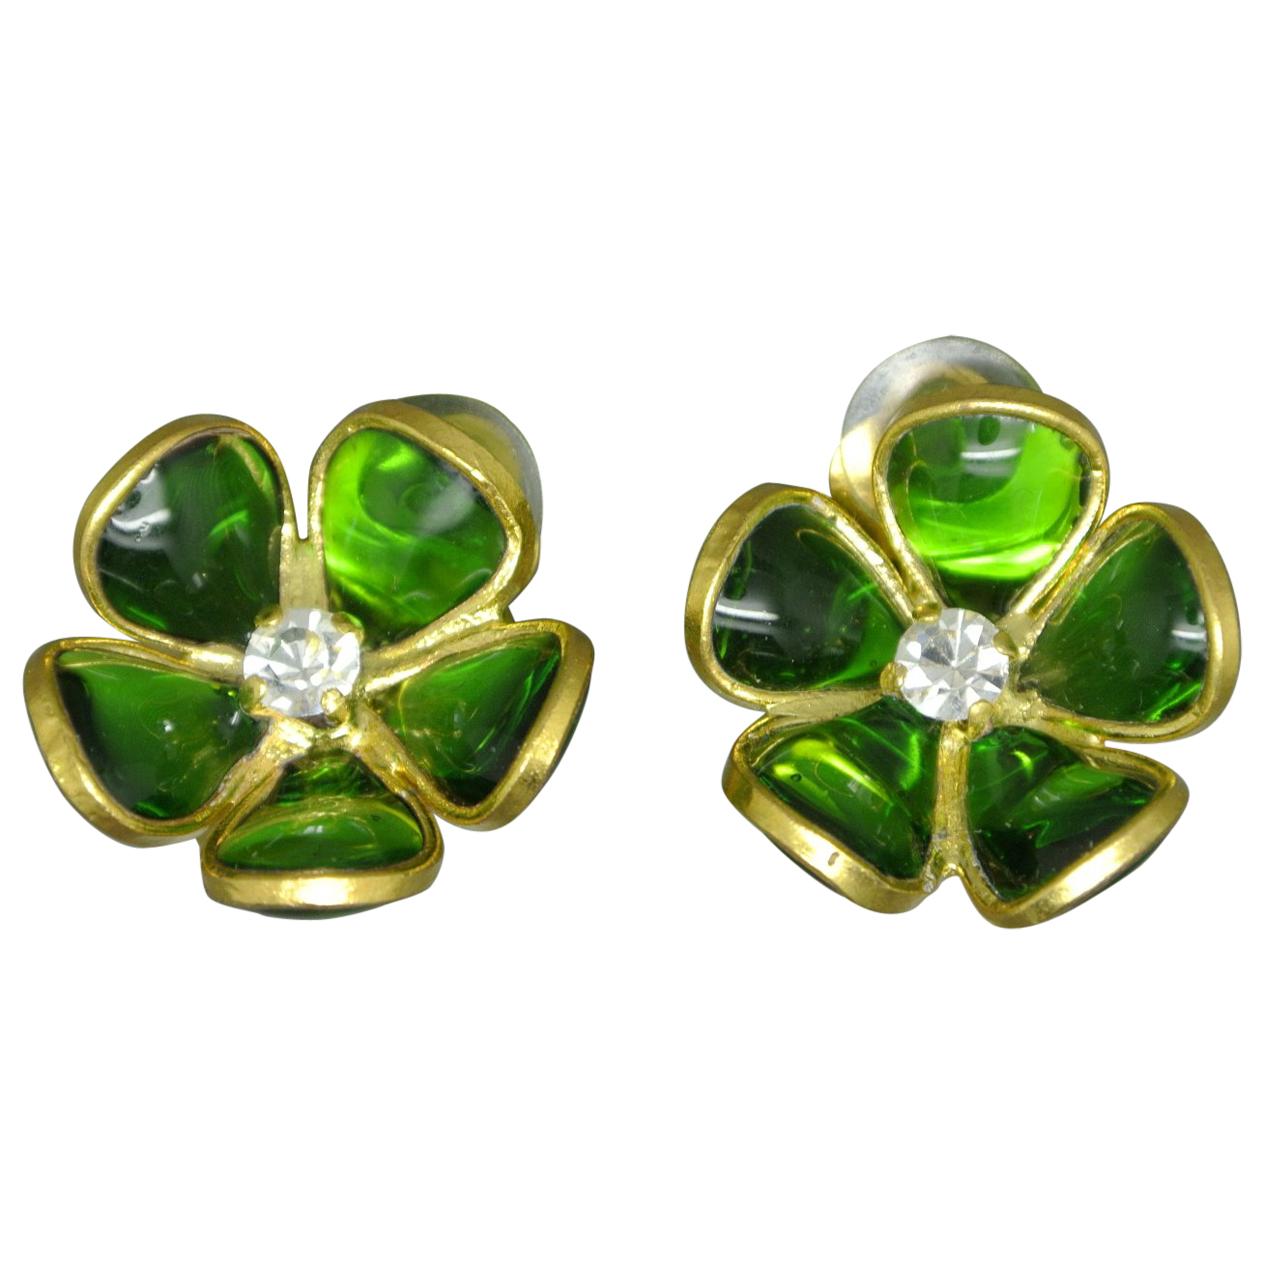 French Gripoix emerald Green flower Poured Glass Earrings For Sale